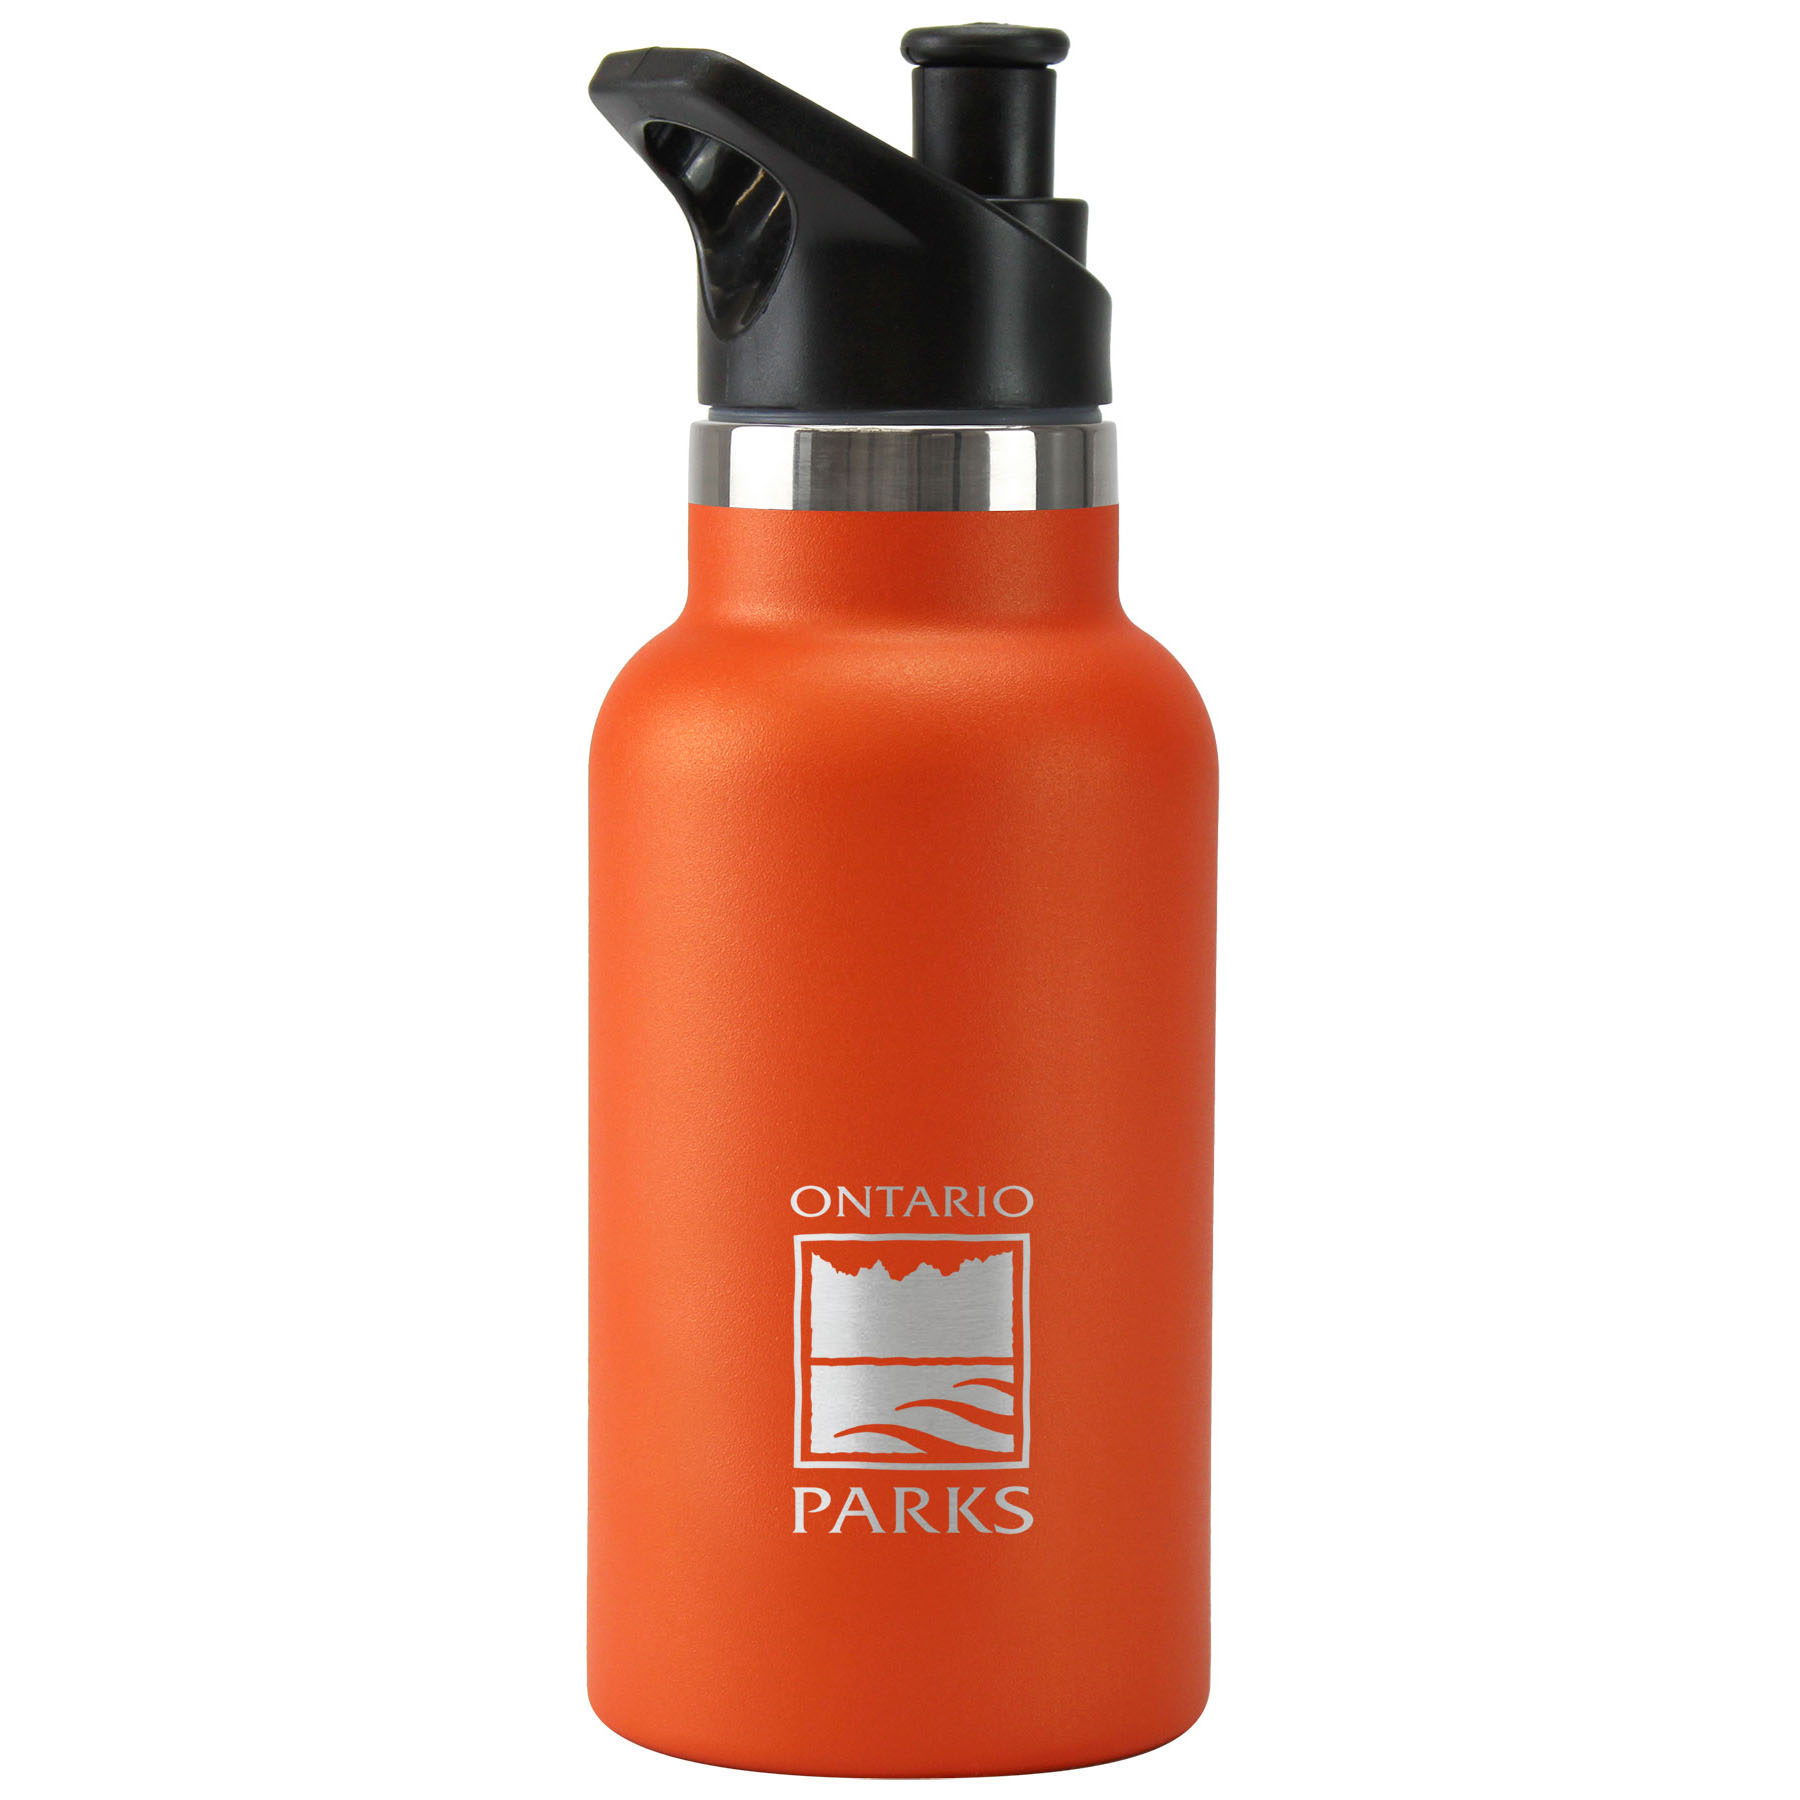 A stout reusable bottle with a black cap and an orange body, emblazoned with the Ontario Parks logo